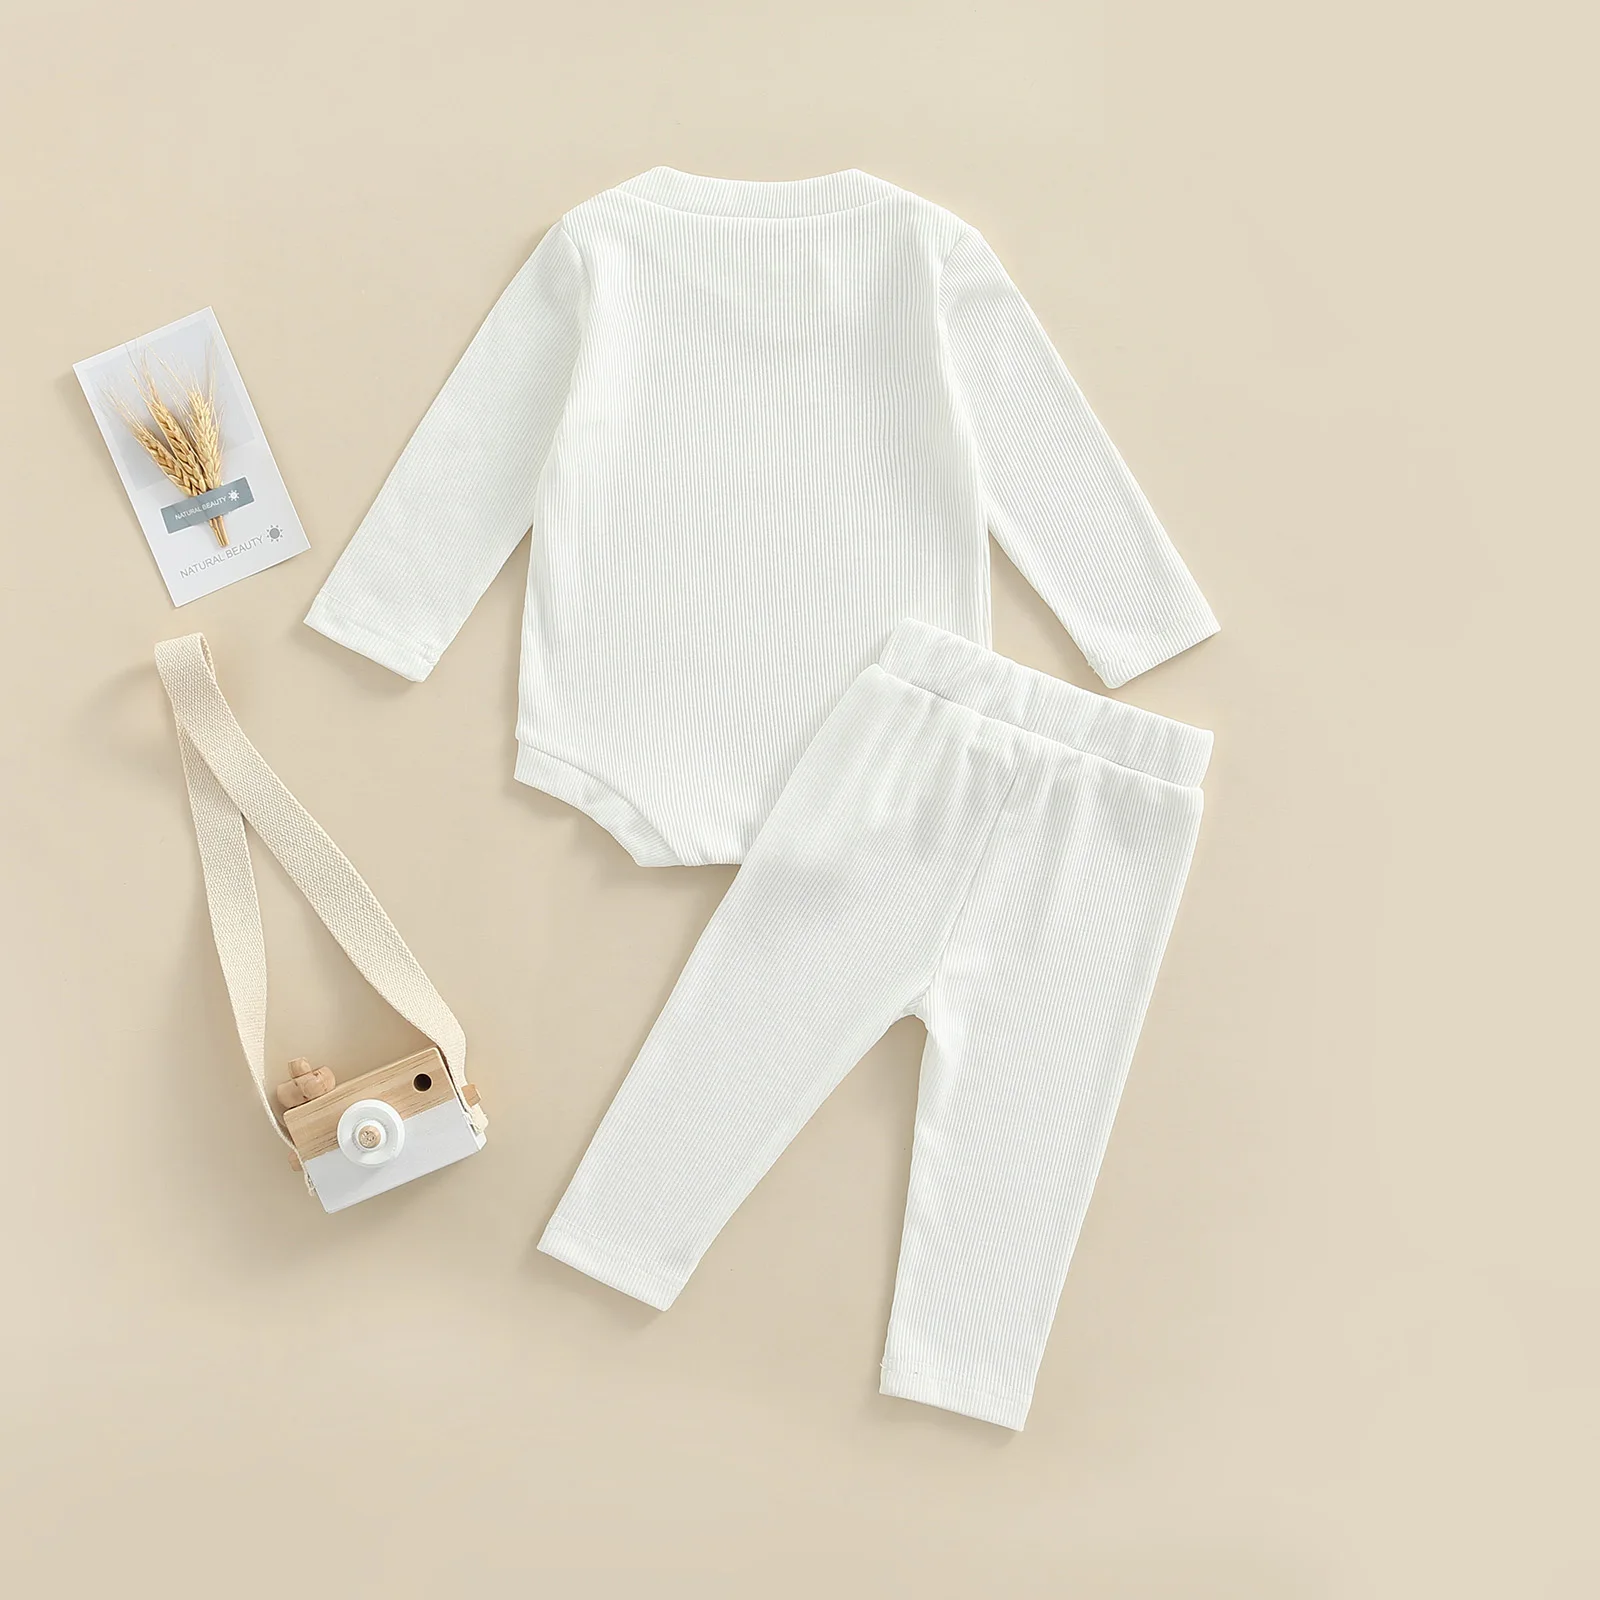 ma&baby 0-18M Spring Autumn Newborn Infant Baby Girls Boys Clothes Set Knitted Soft Romper Pants Outfits Clothing